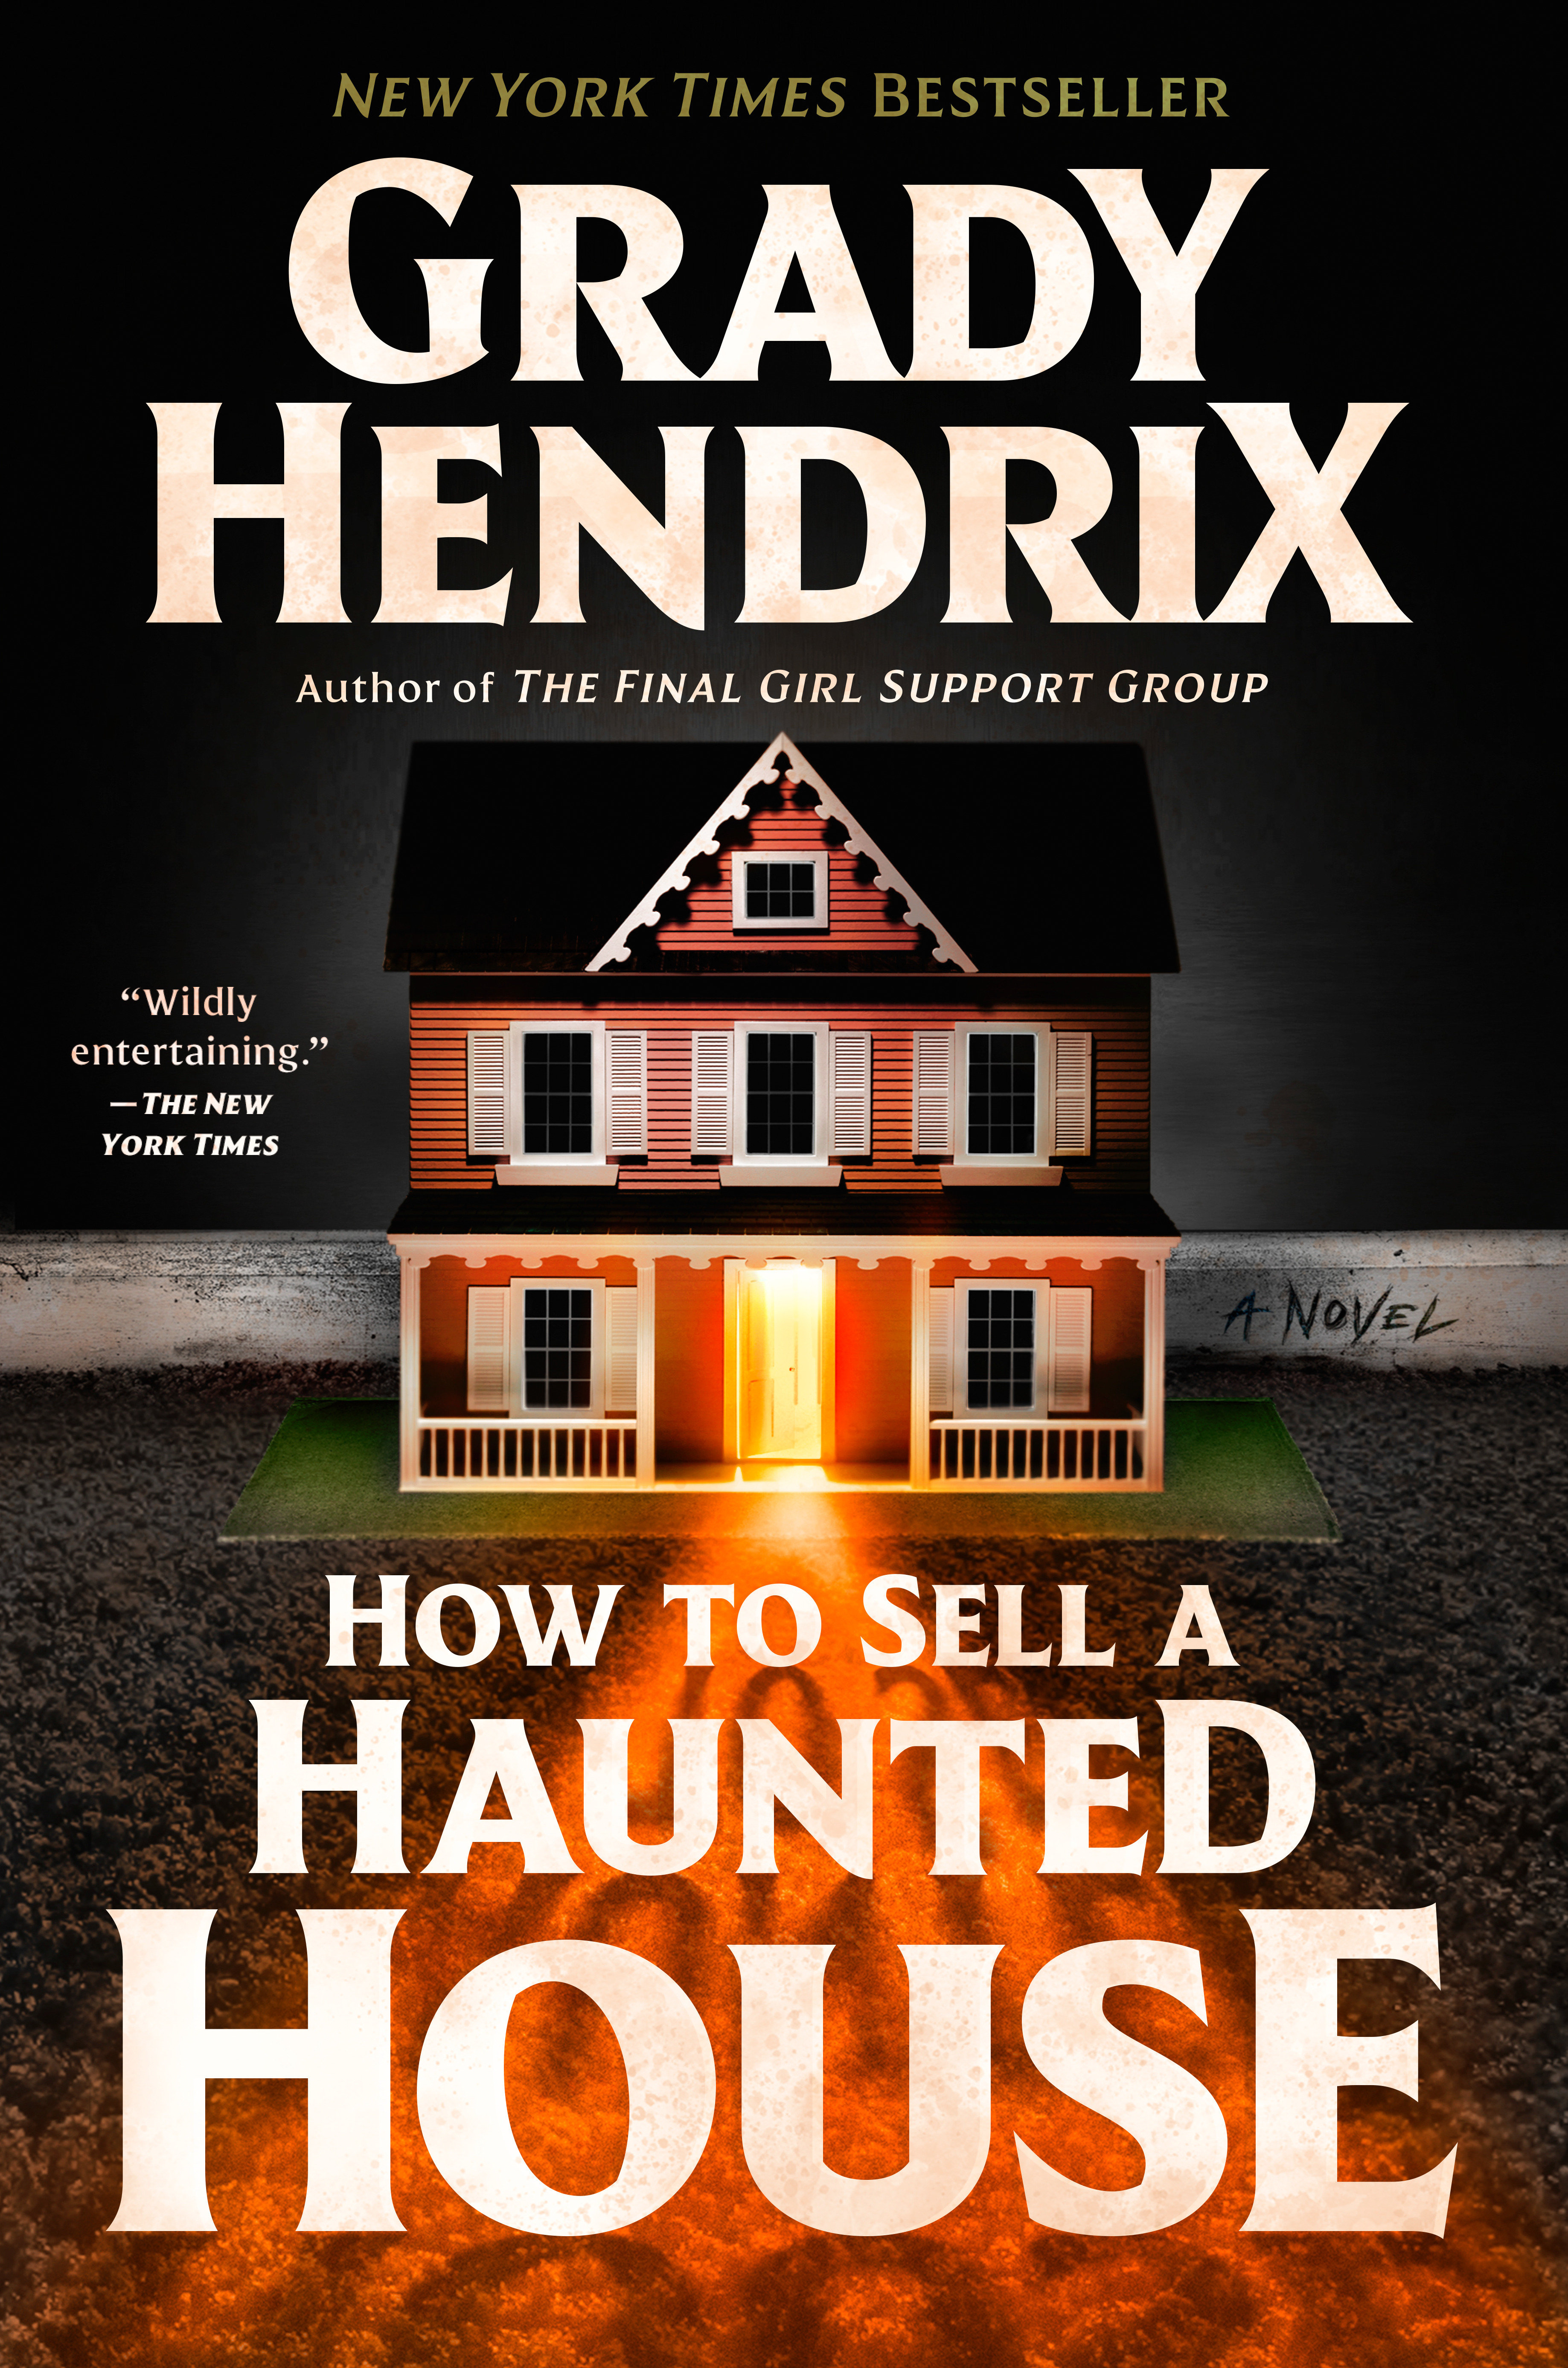 How To Sell A Haunted House (Hardcover Book)